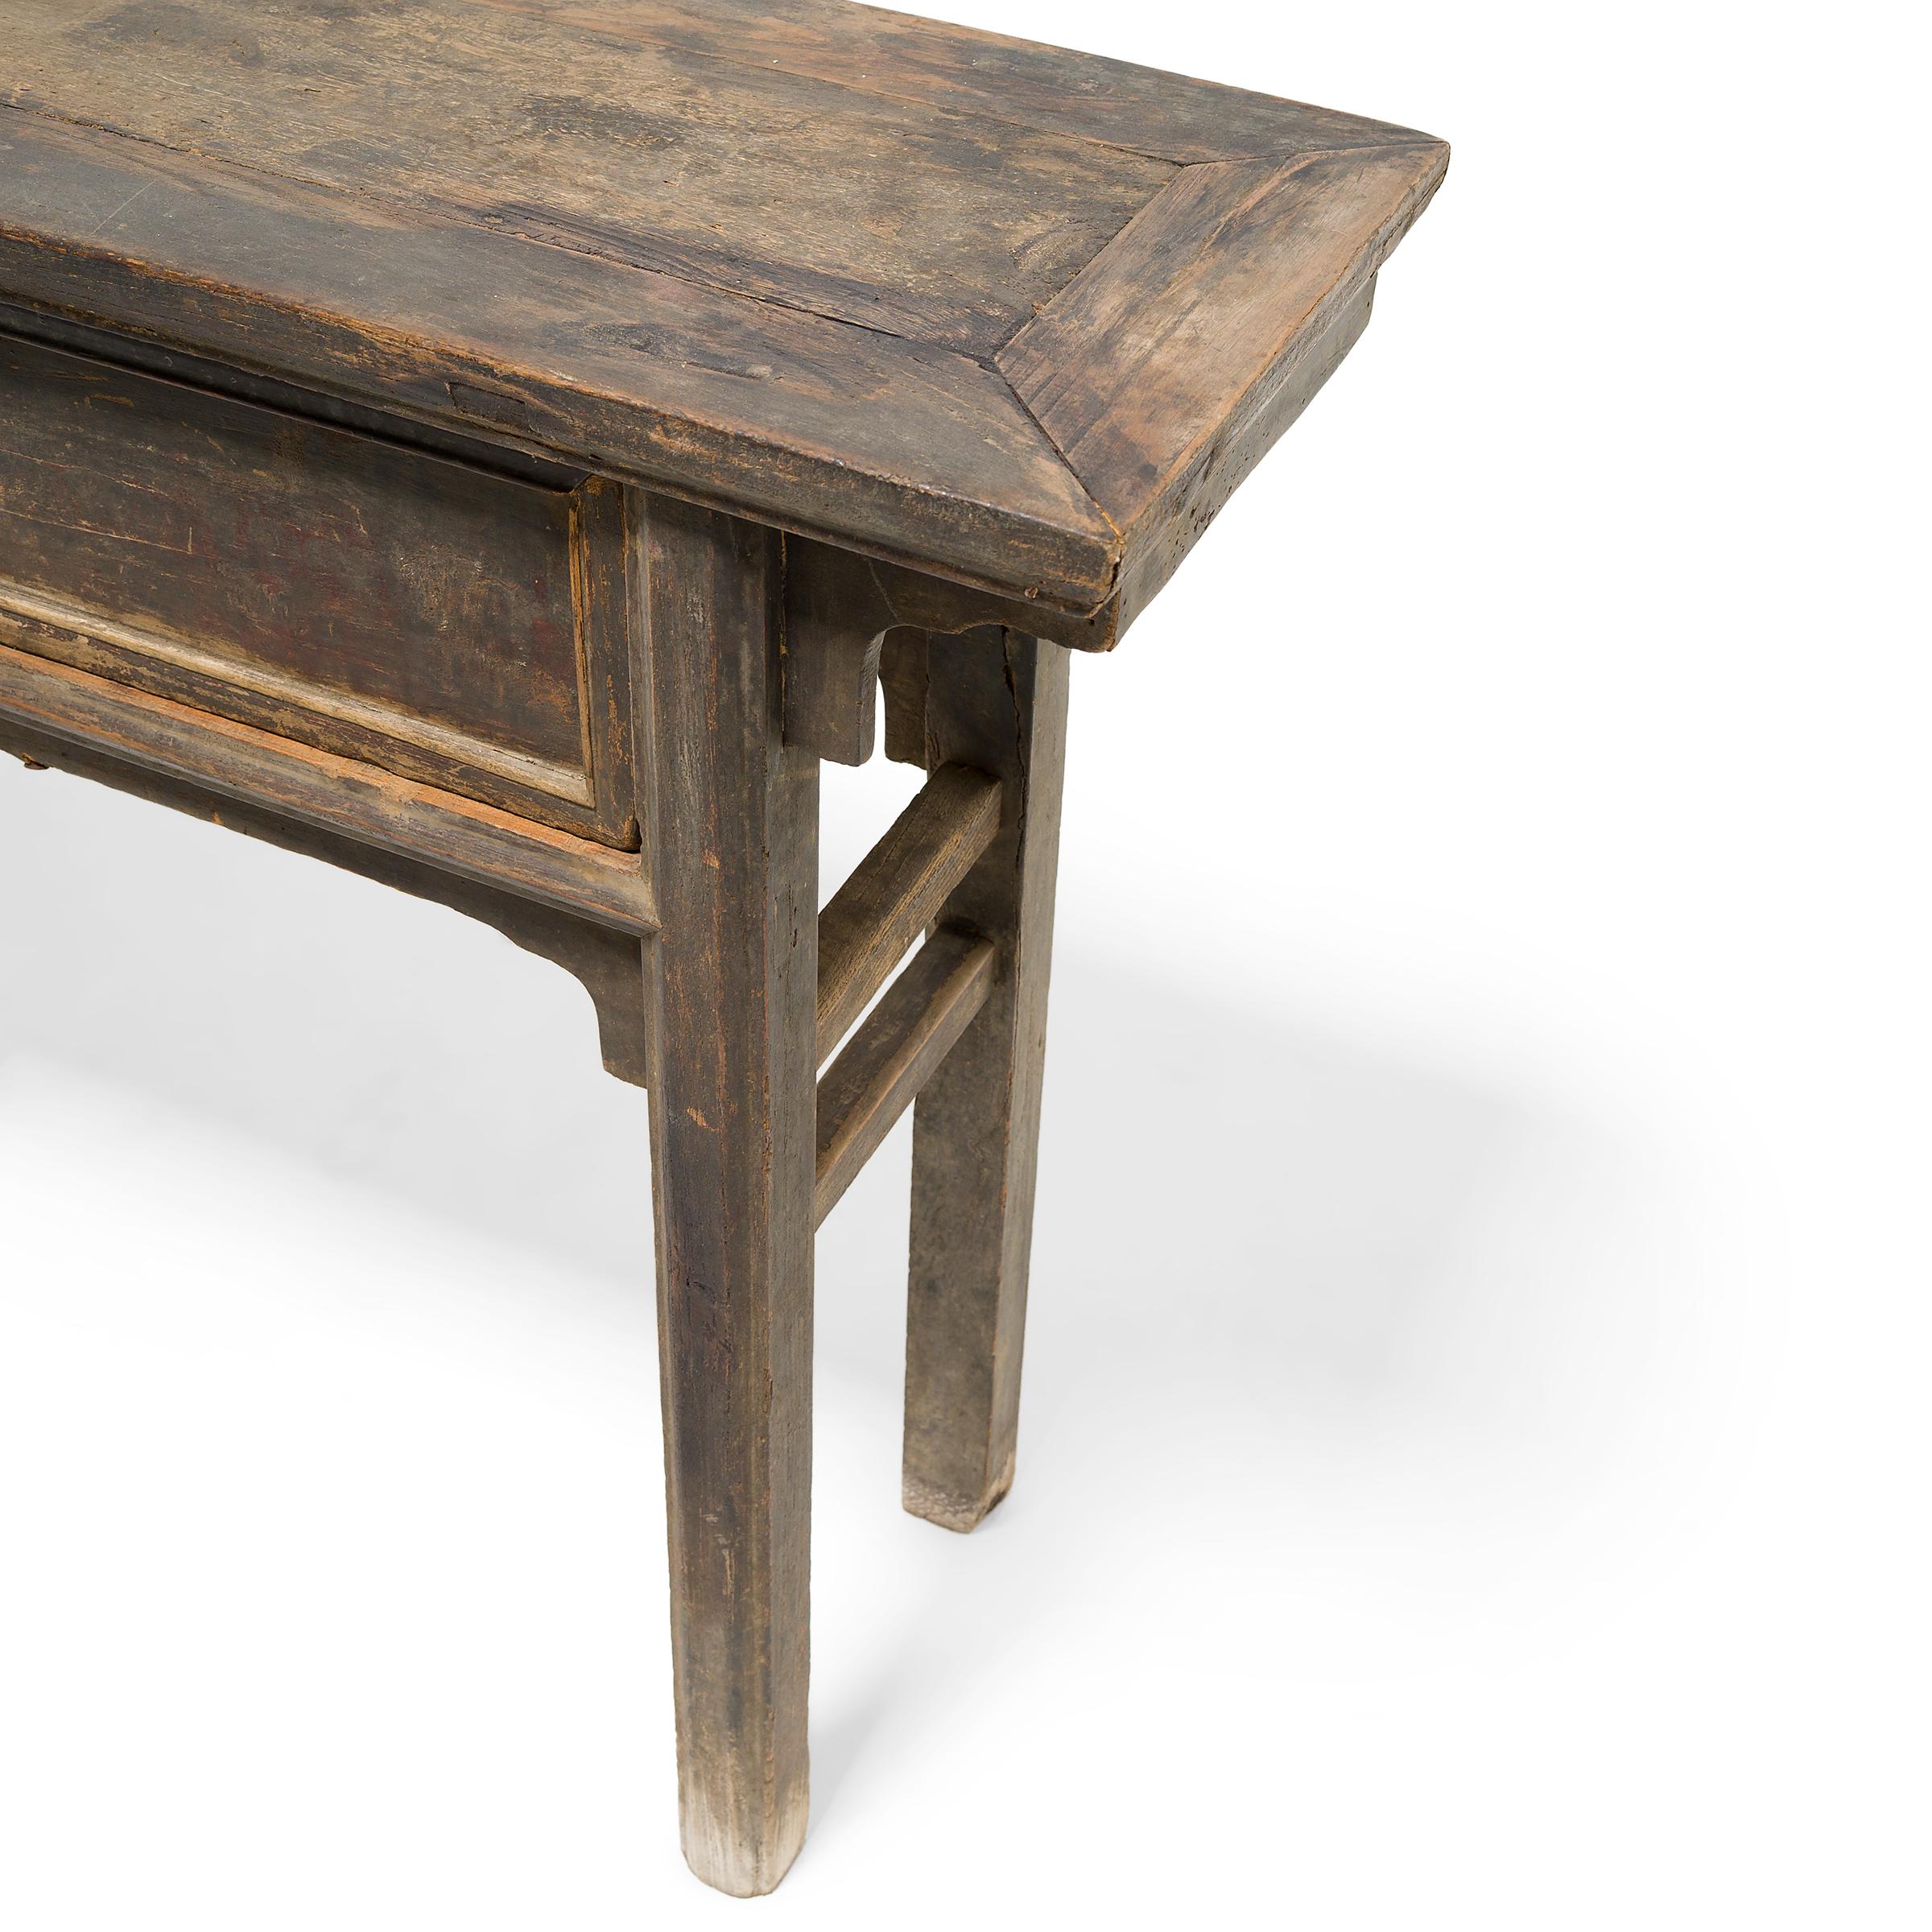 Chinese Shallow Offering Table, c. 1800 For Sale 2